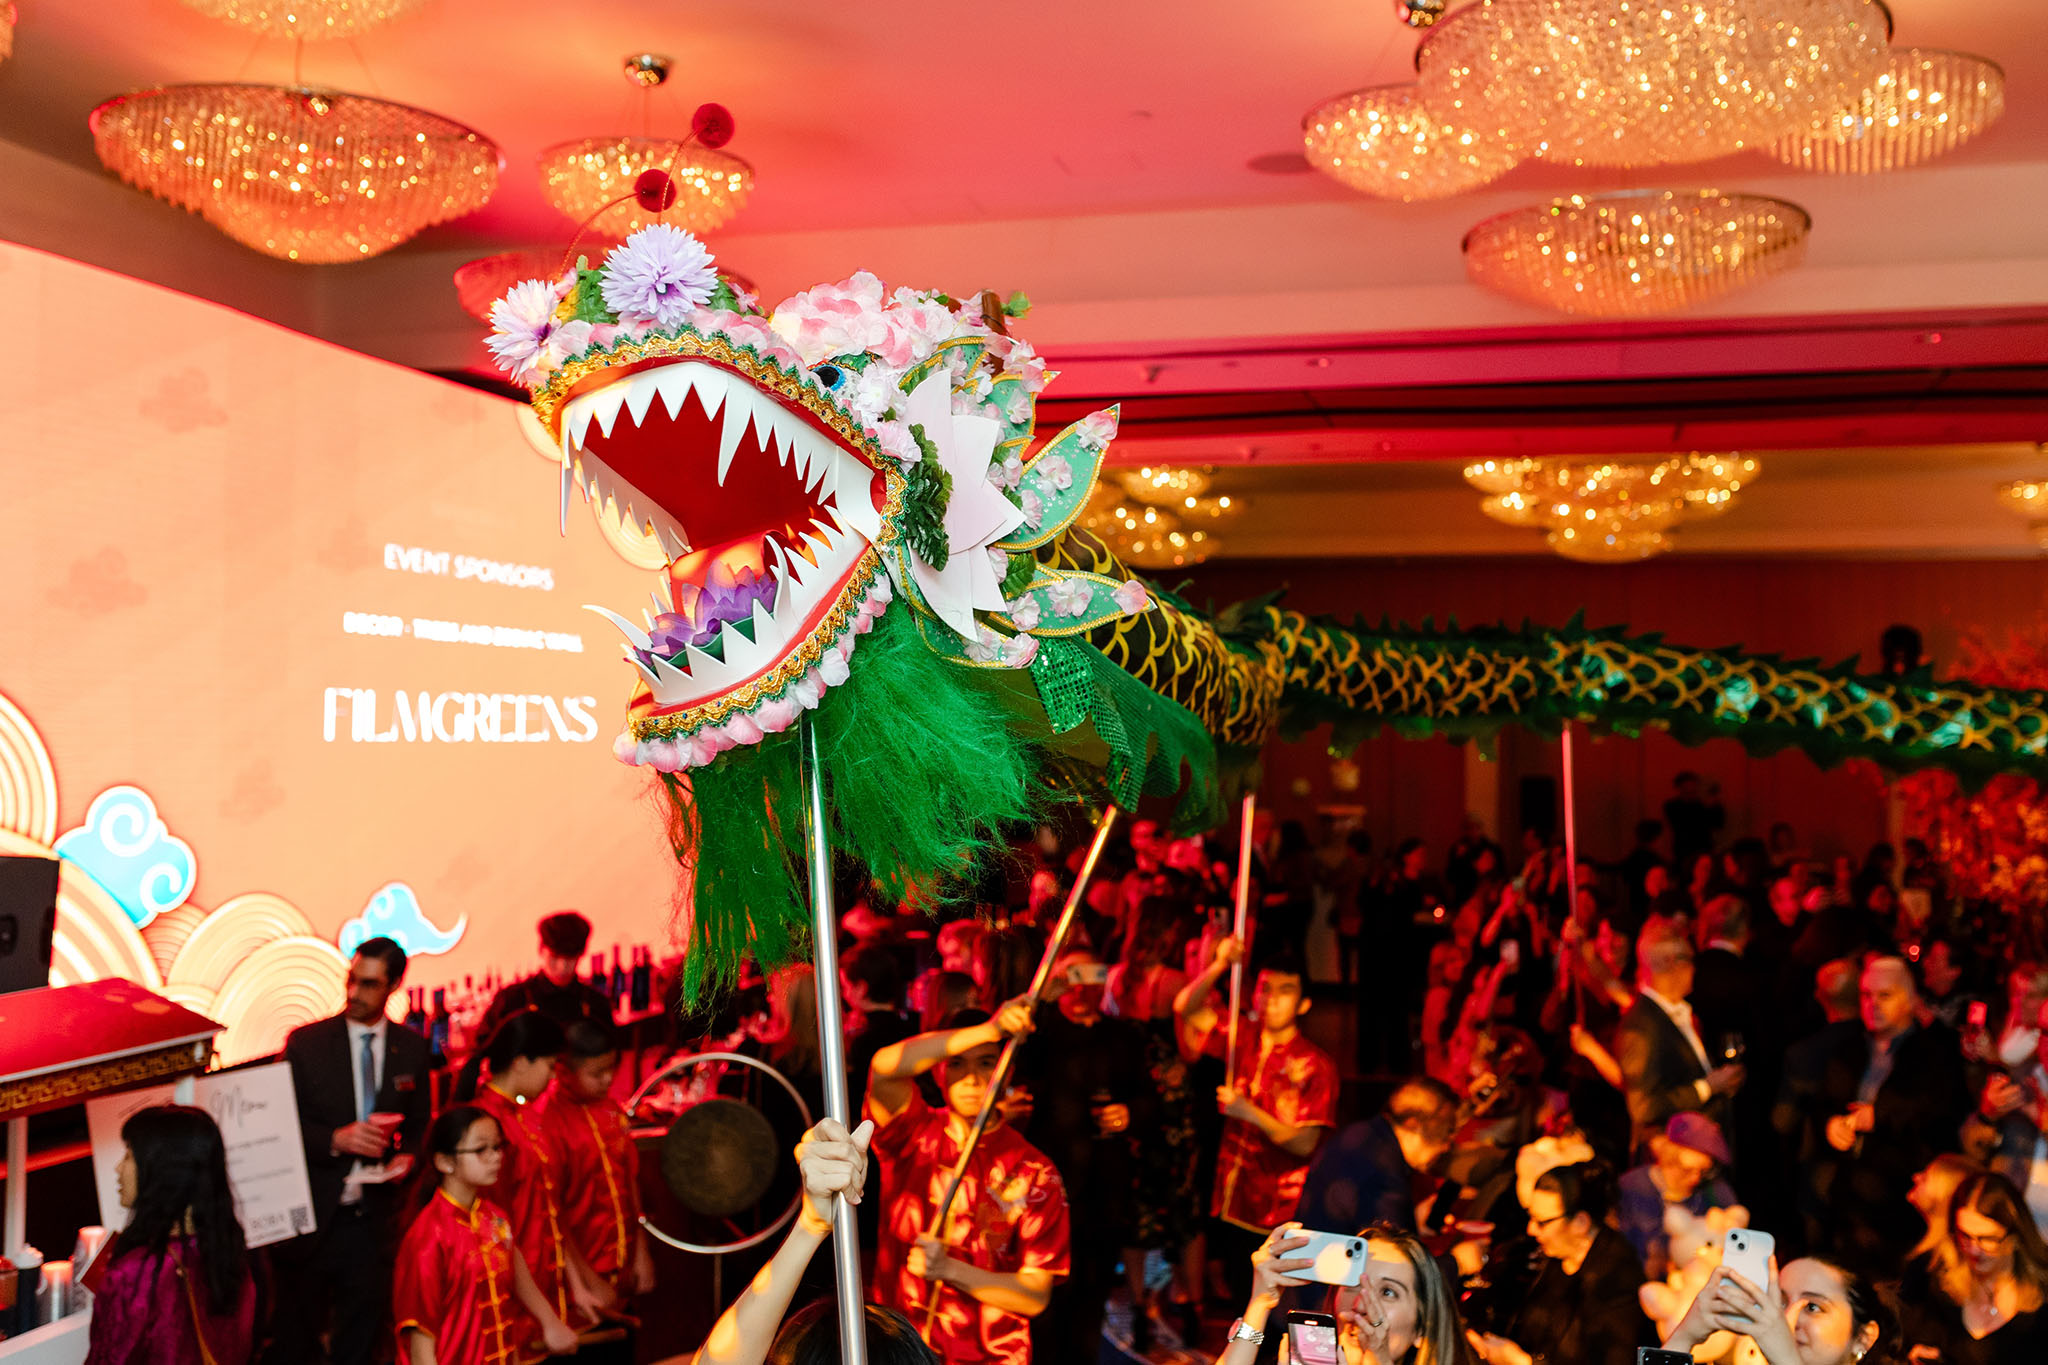 Corporate photography at a Chinese event featuring a dragon in the background.